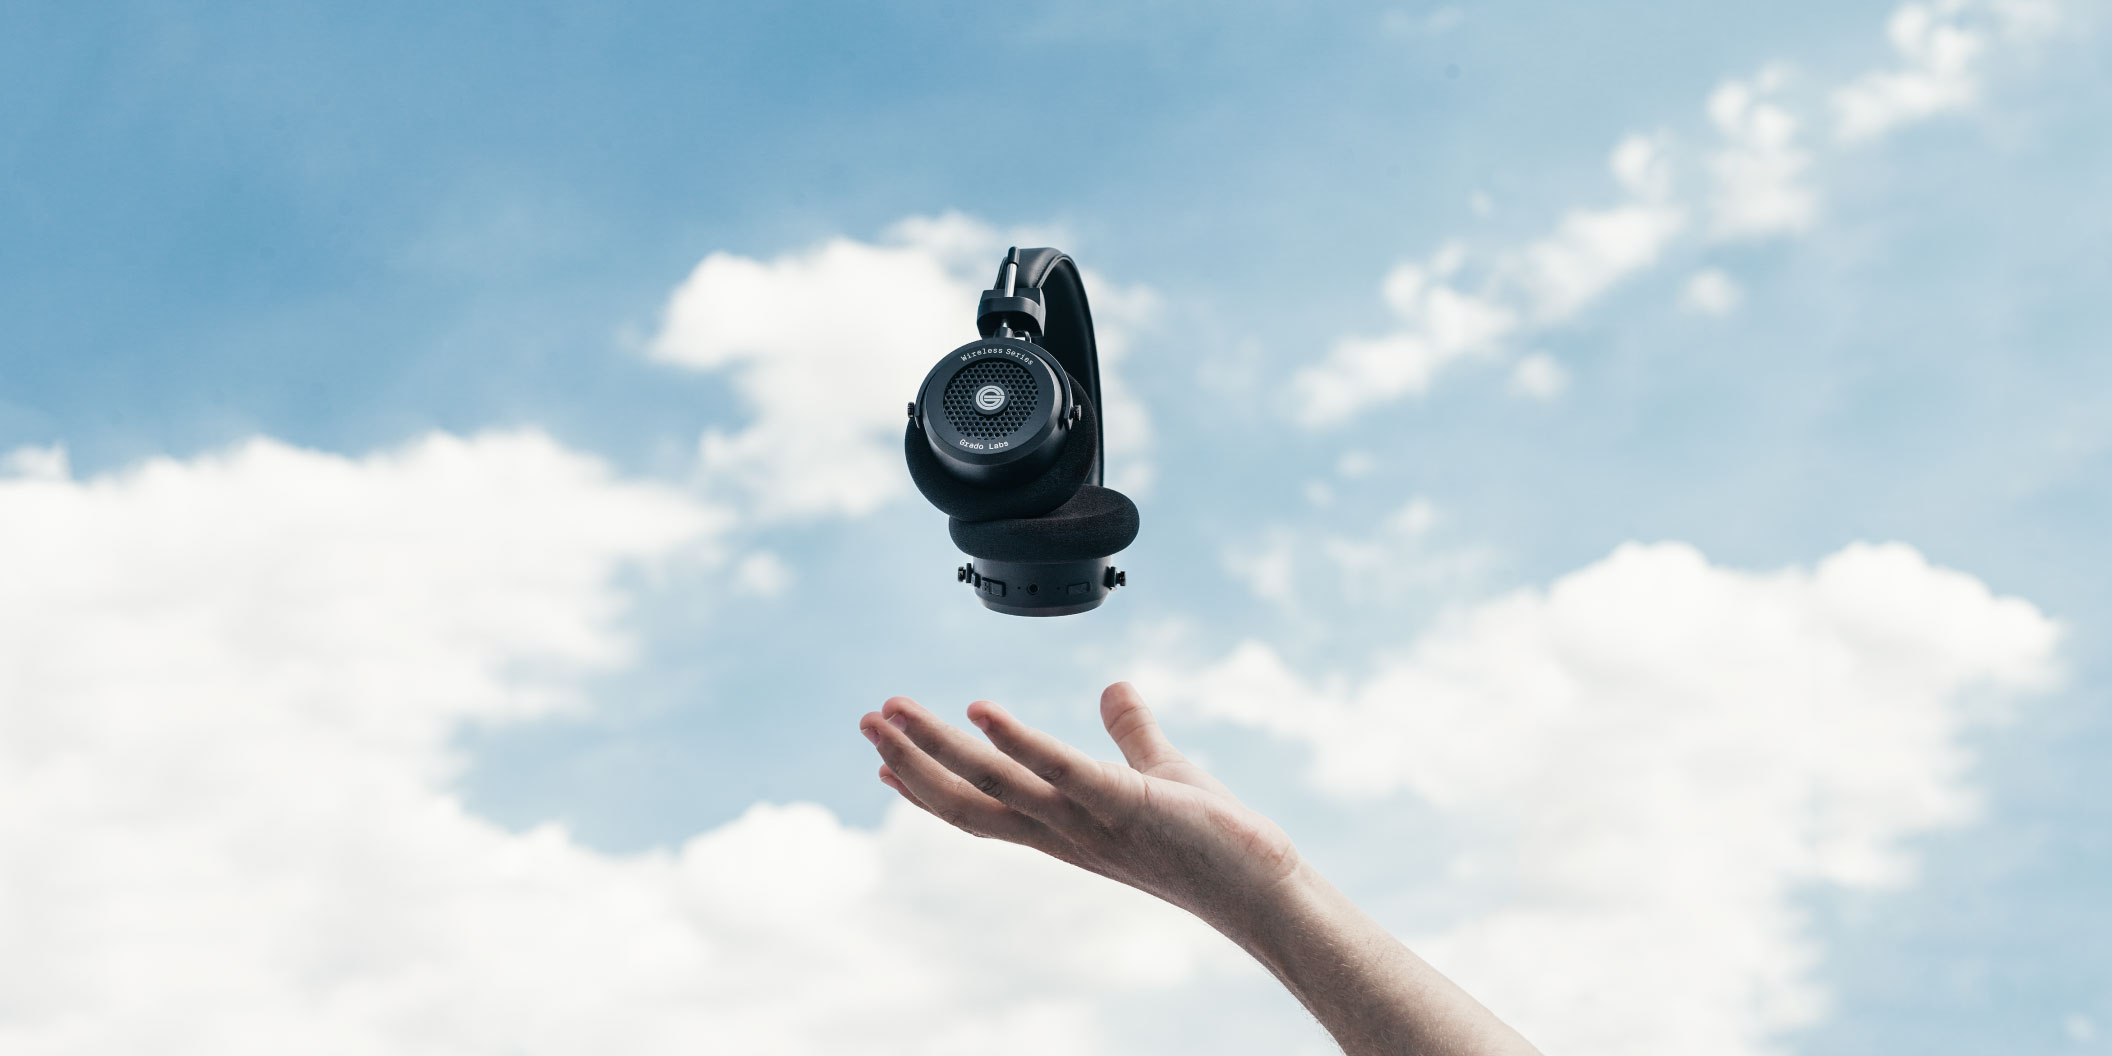 Photo of gw100 headphones levitating above a persons hand with a blue sky and clouds in the background